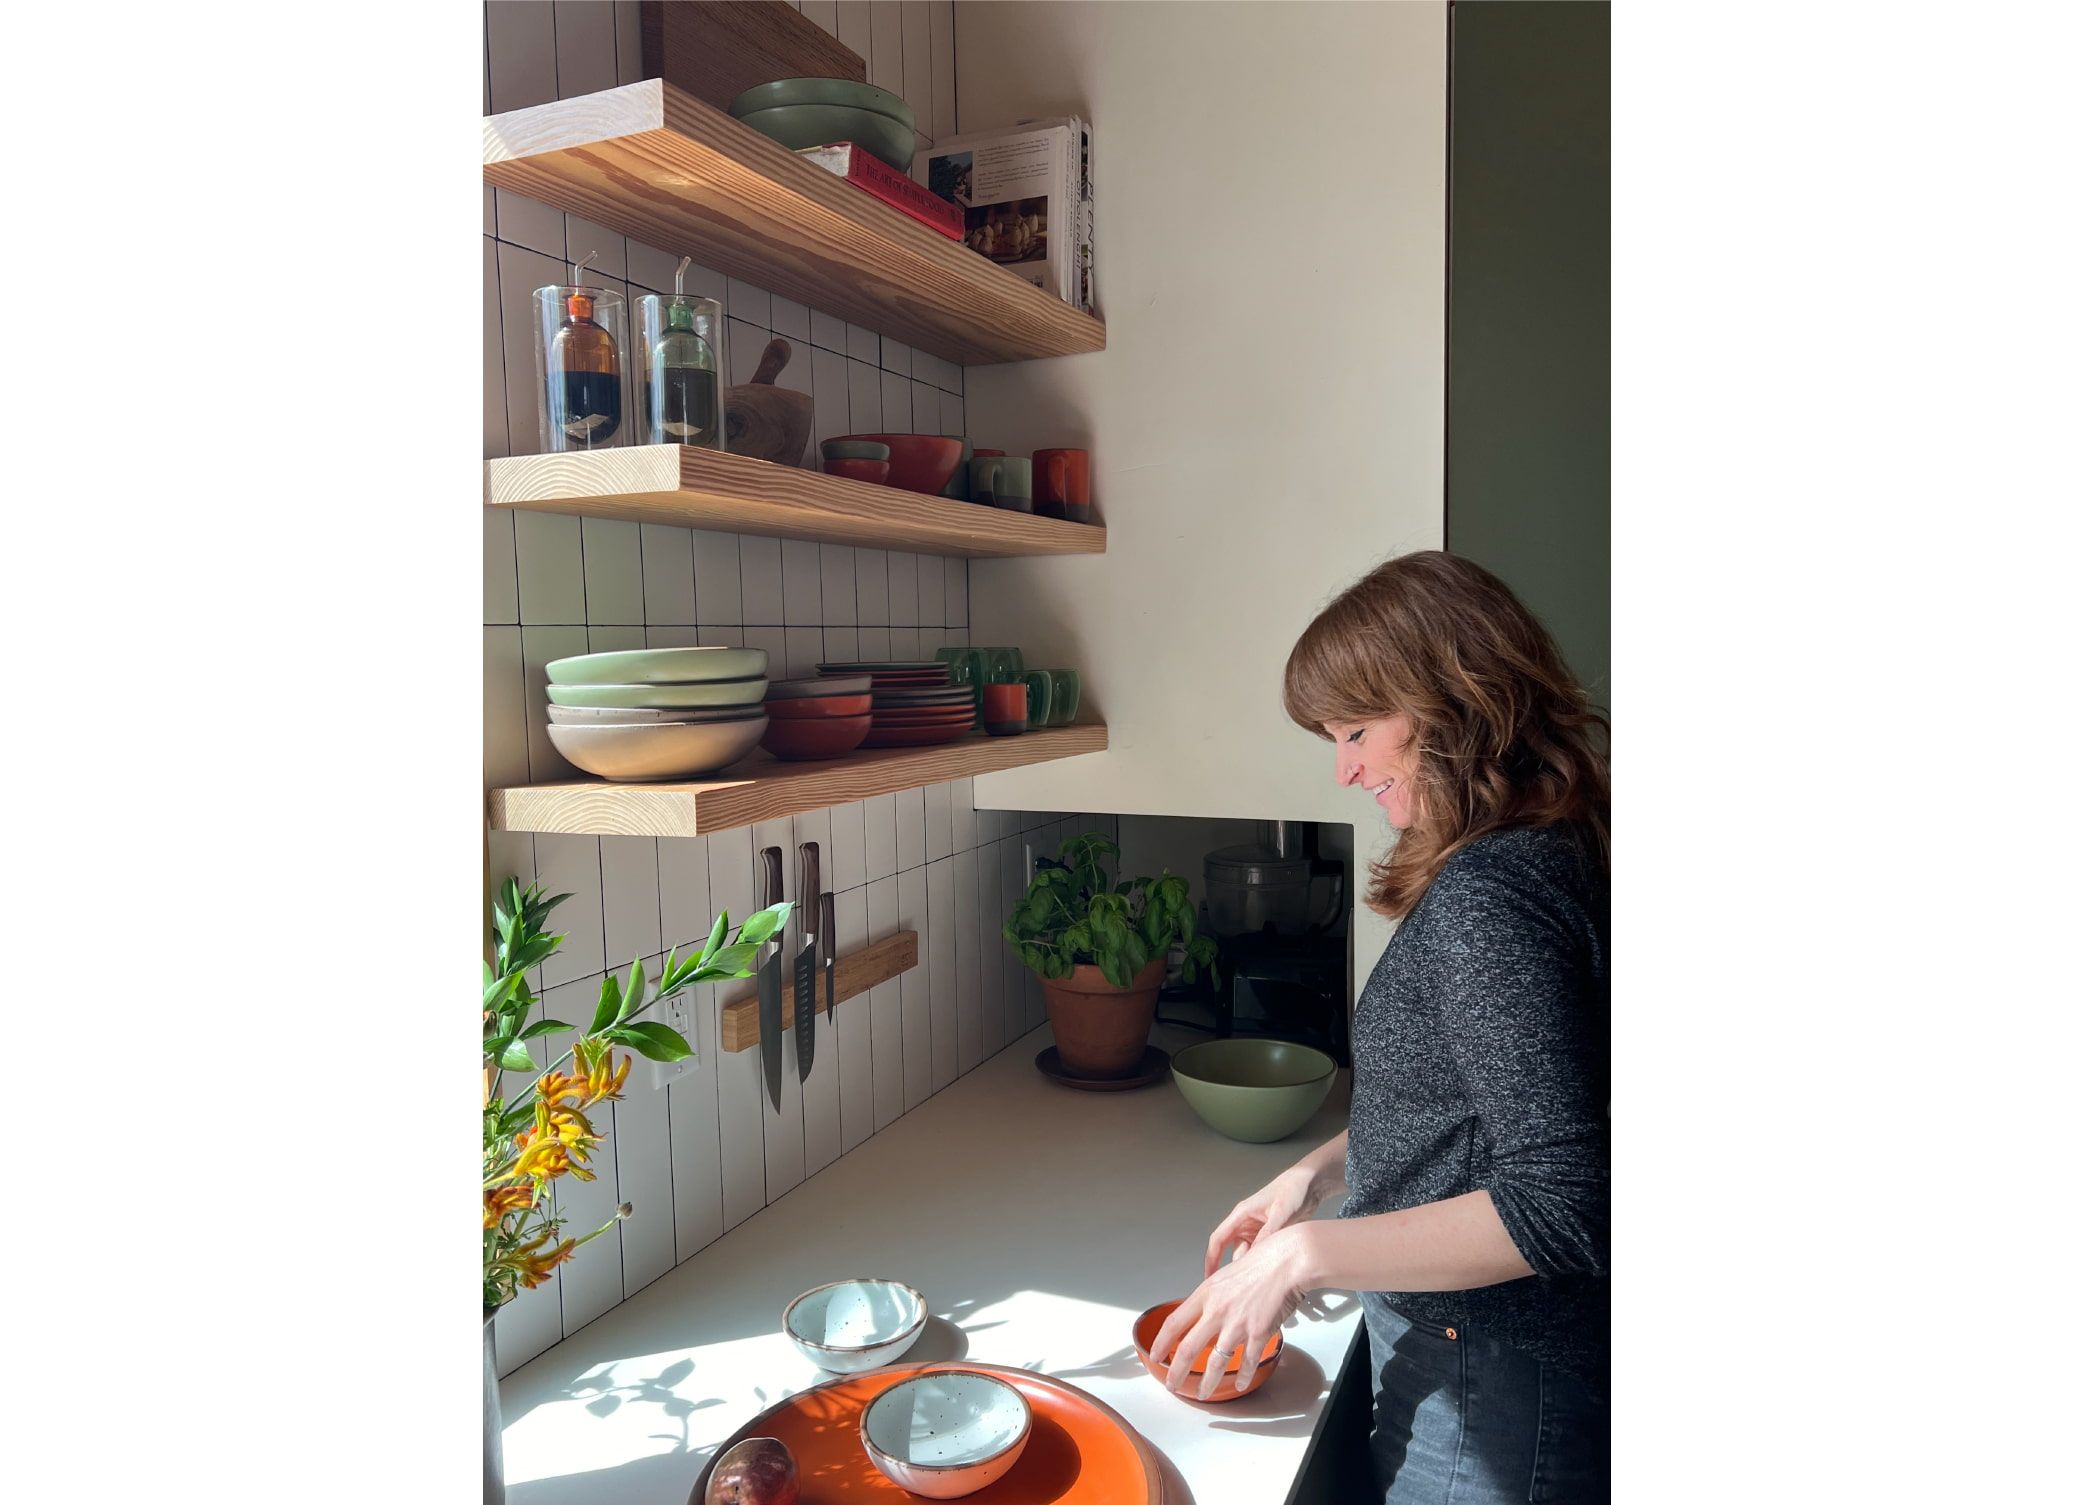 Nicole is arranging ceramic bowls in a bold orange color in a kitchen.